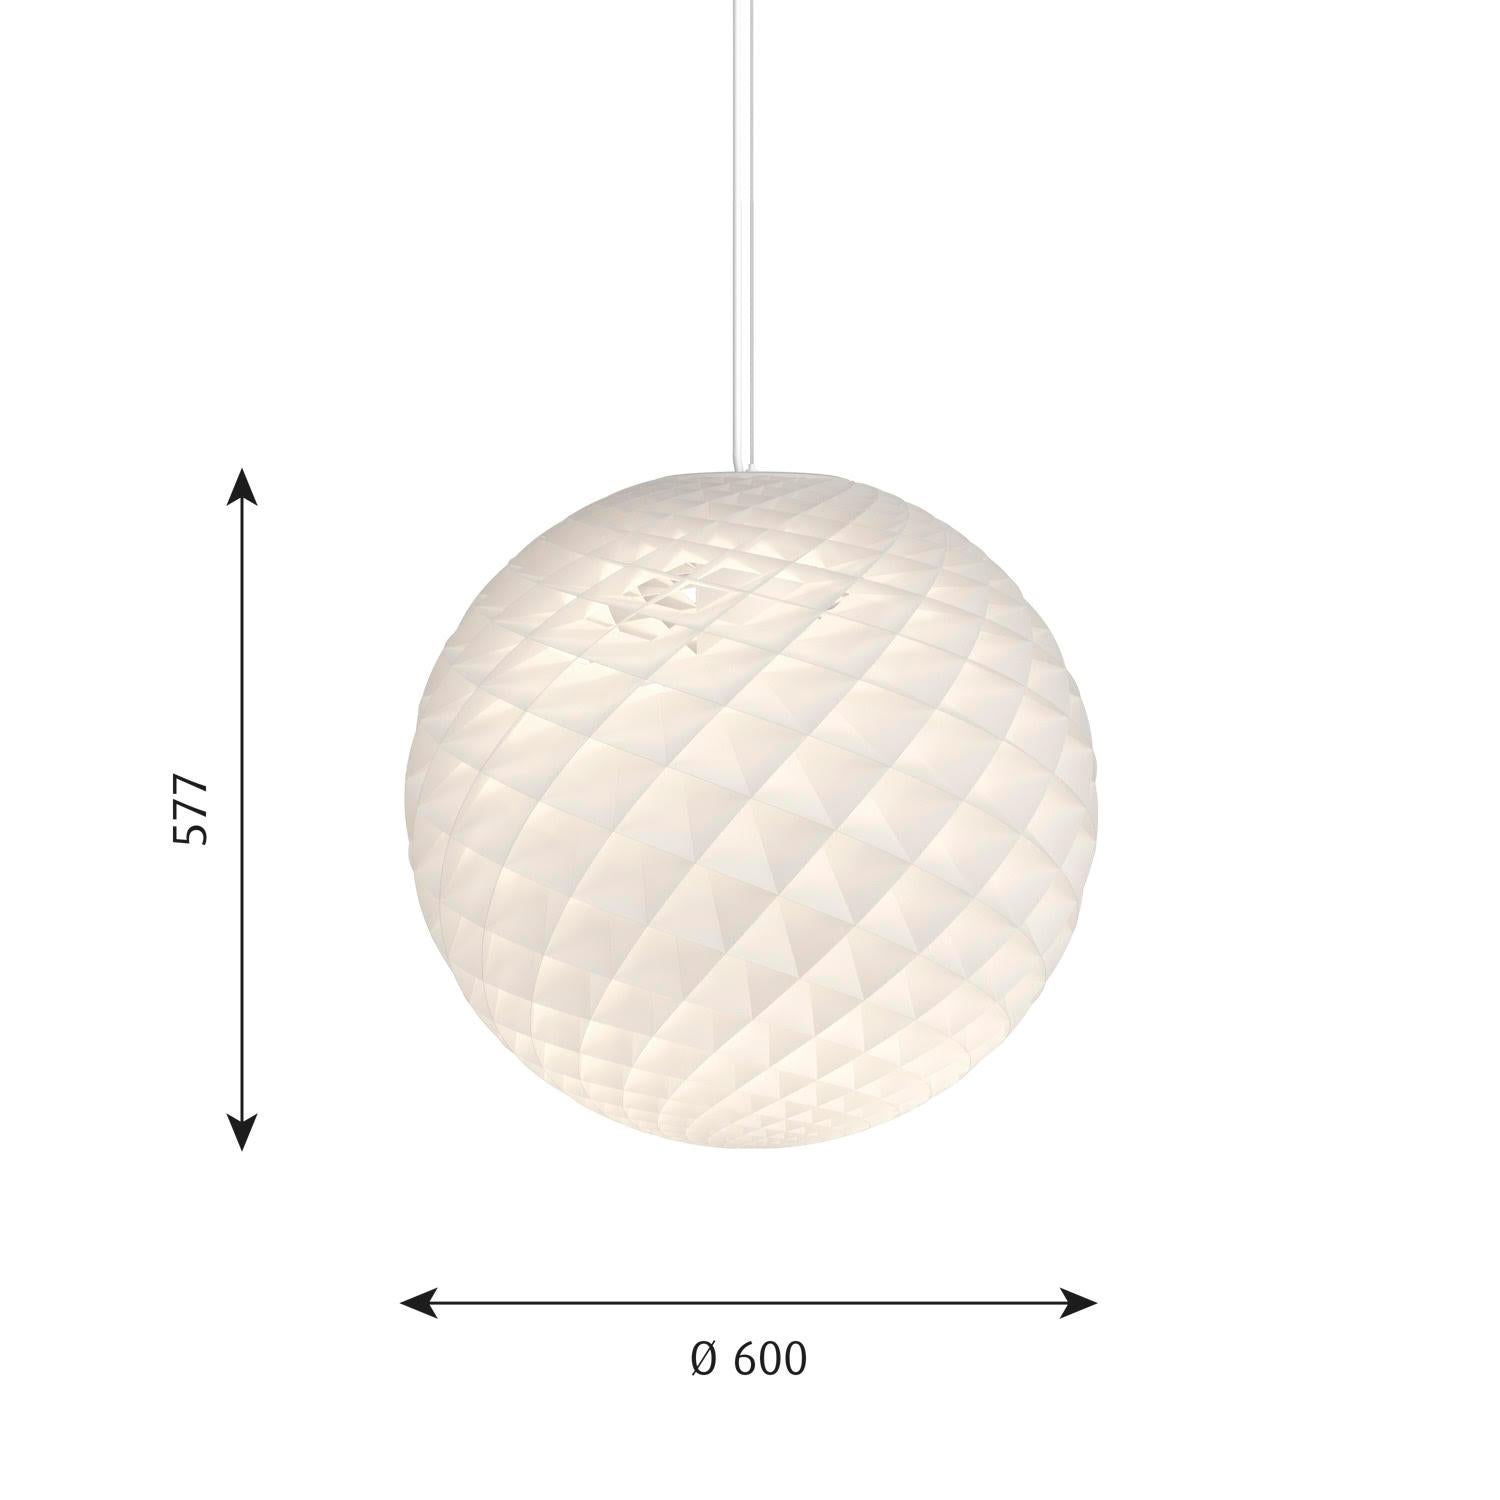 Louis Poulsen D600 Patere Round Chandelier

Patere Round Chandelier D600 by Louis Poulsen
Patera is composed of a series of alveoli whose angles are carefully calculated to produce this incredible interaction between light and shadow. The shape of